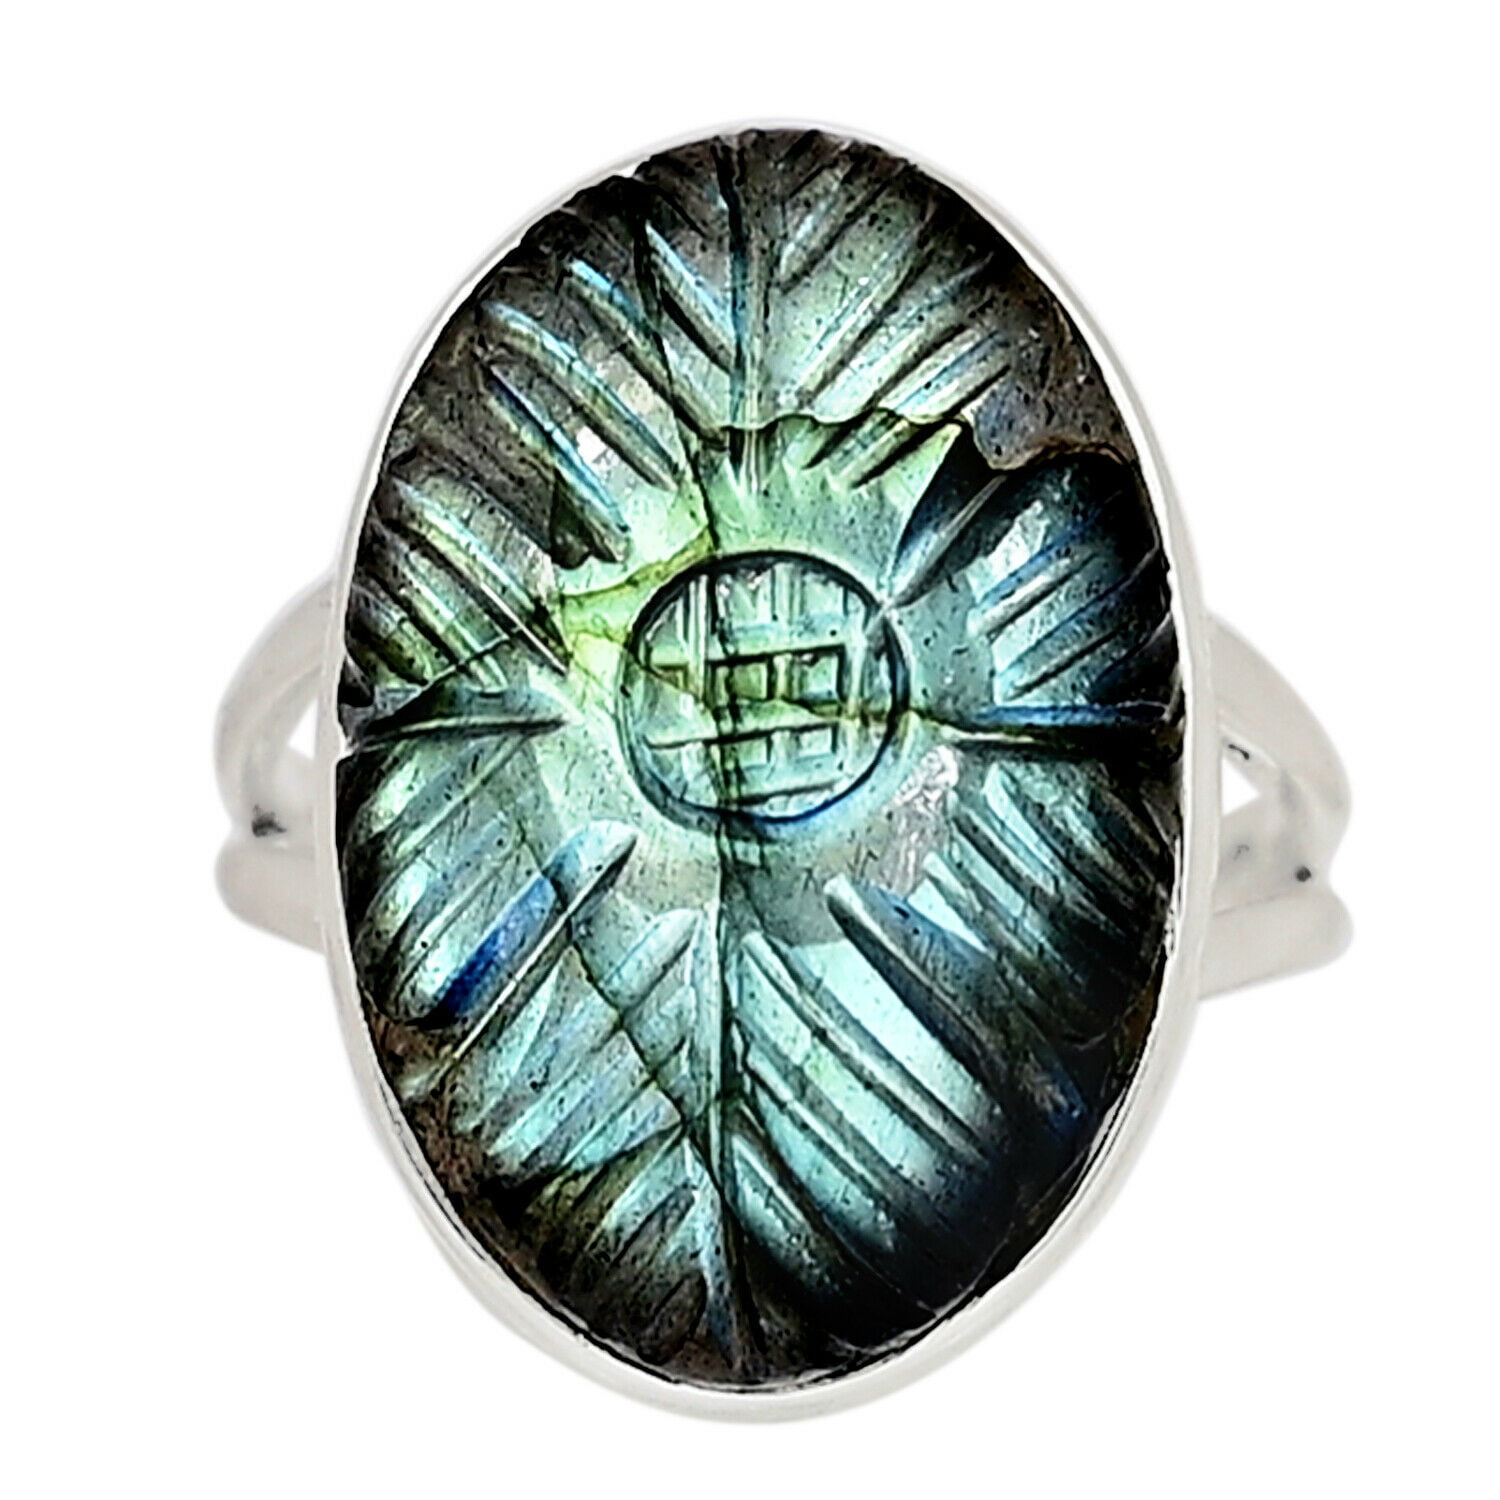 Flashy Labradorite Silver Ring 925 Solid Sterling Silver jewelry size 3-14 US 